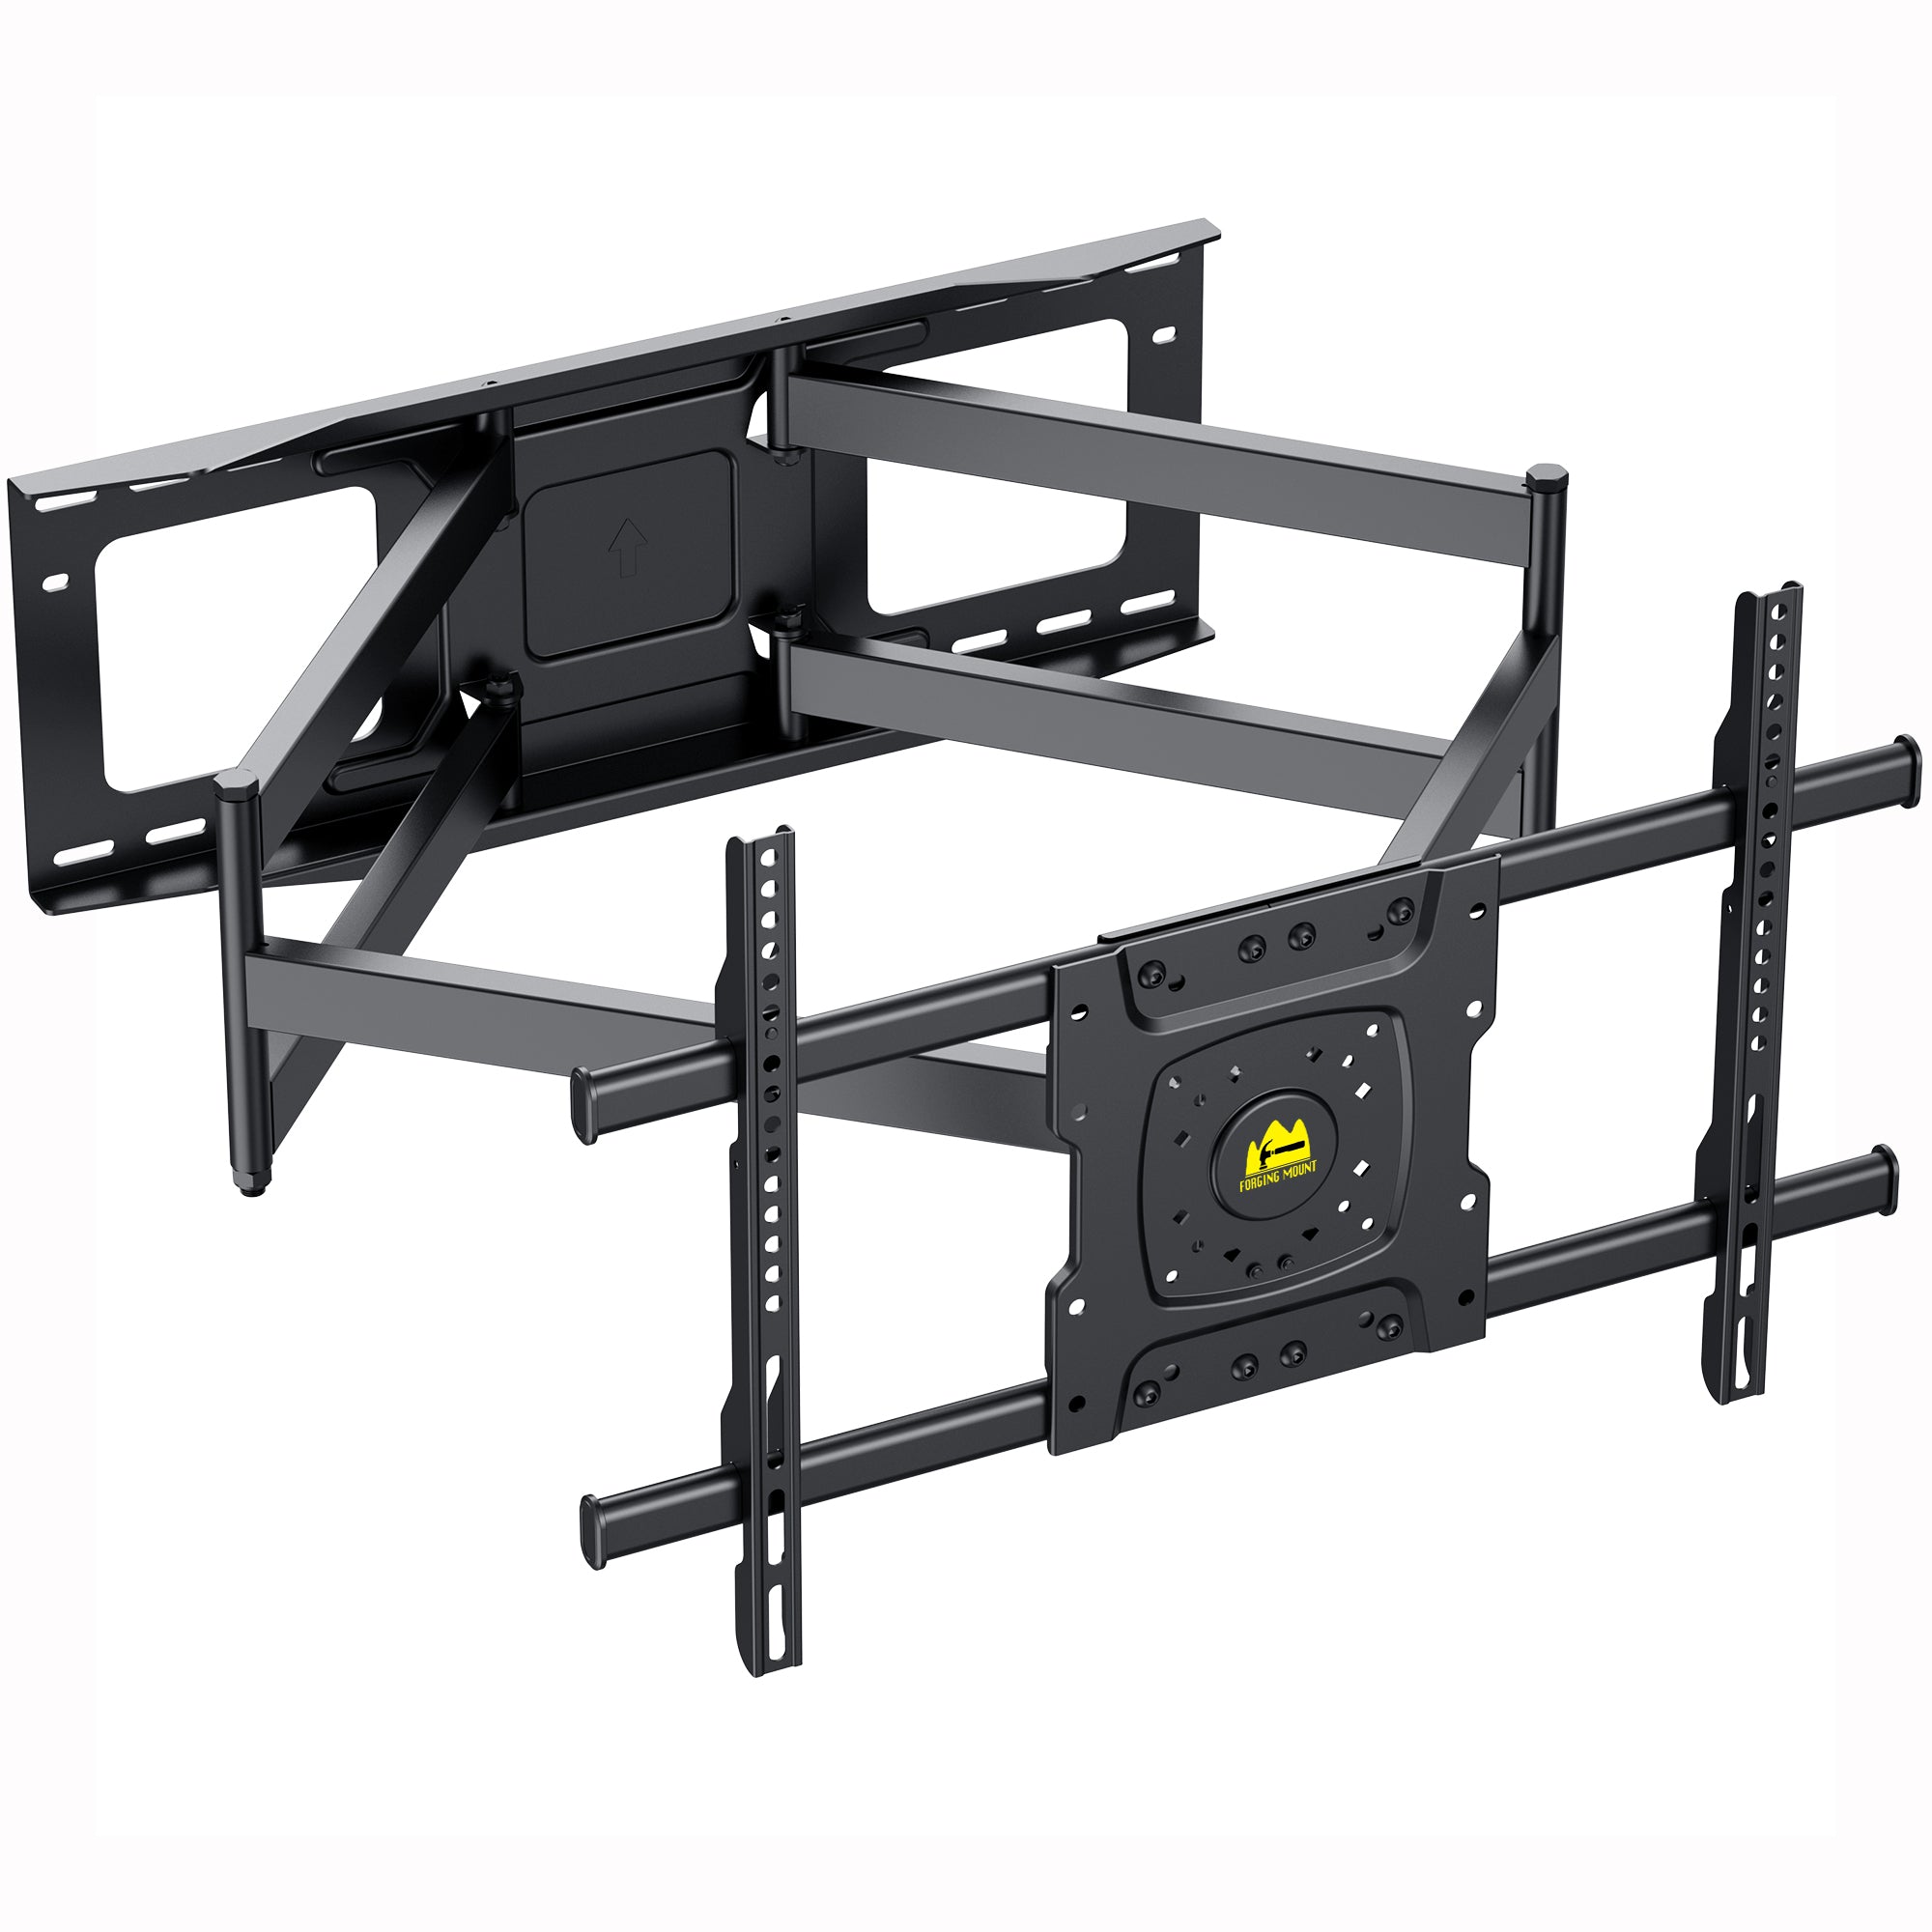  Full Motion TV Wall Mount Bracket for Most 37-86 inch